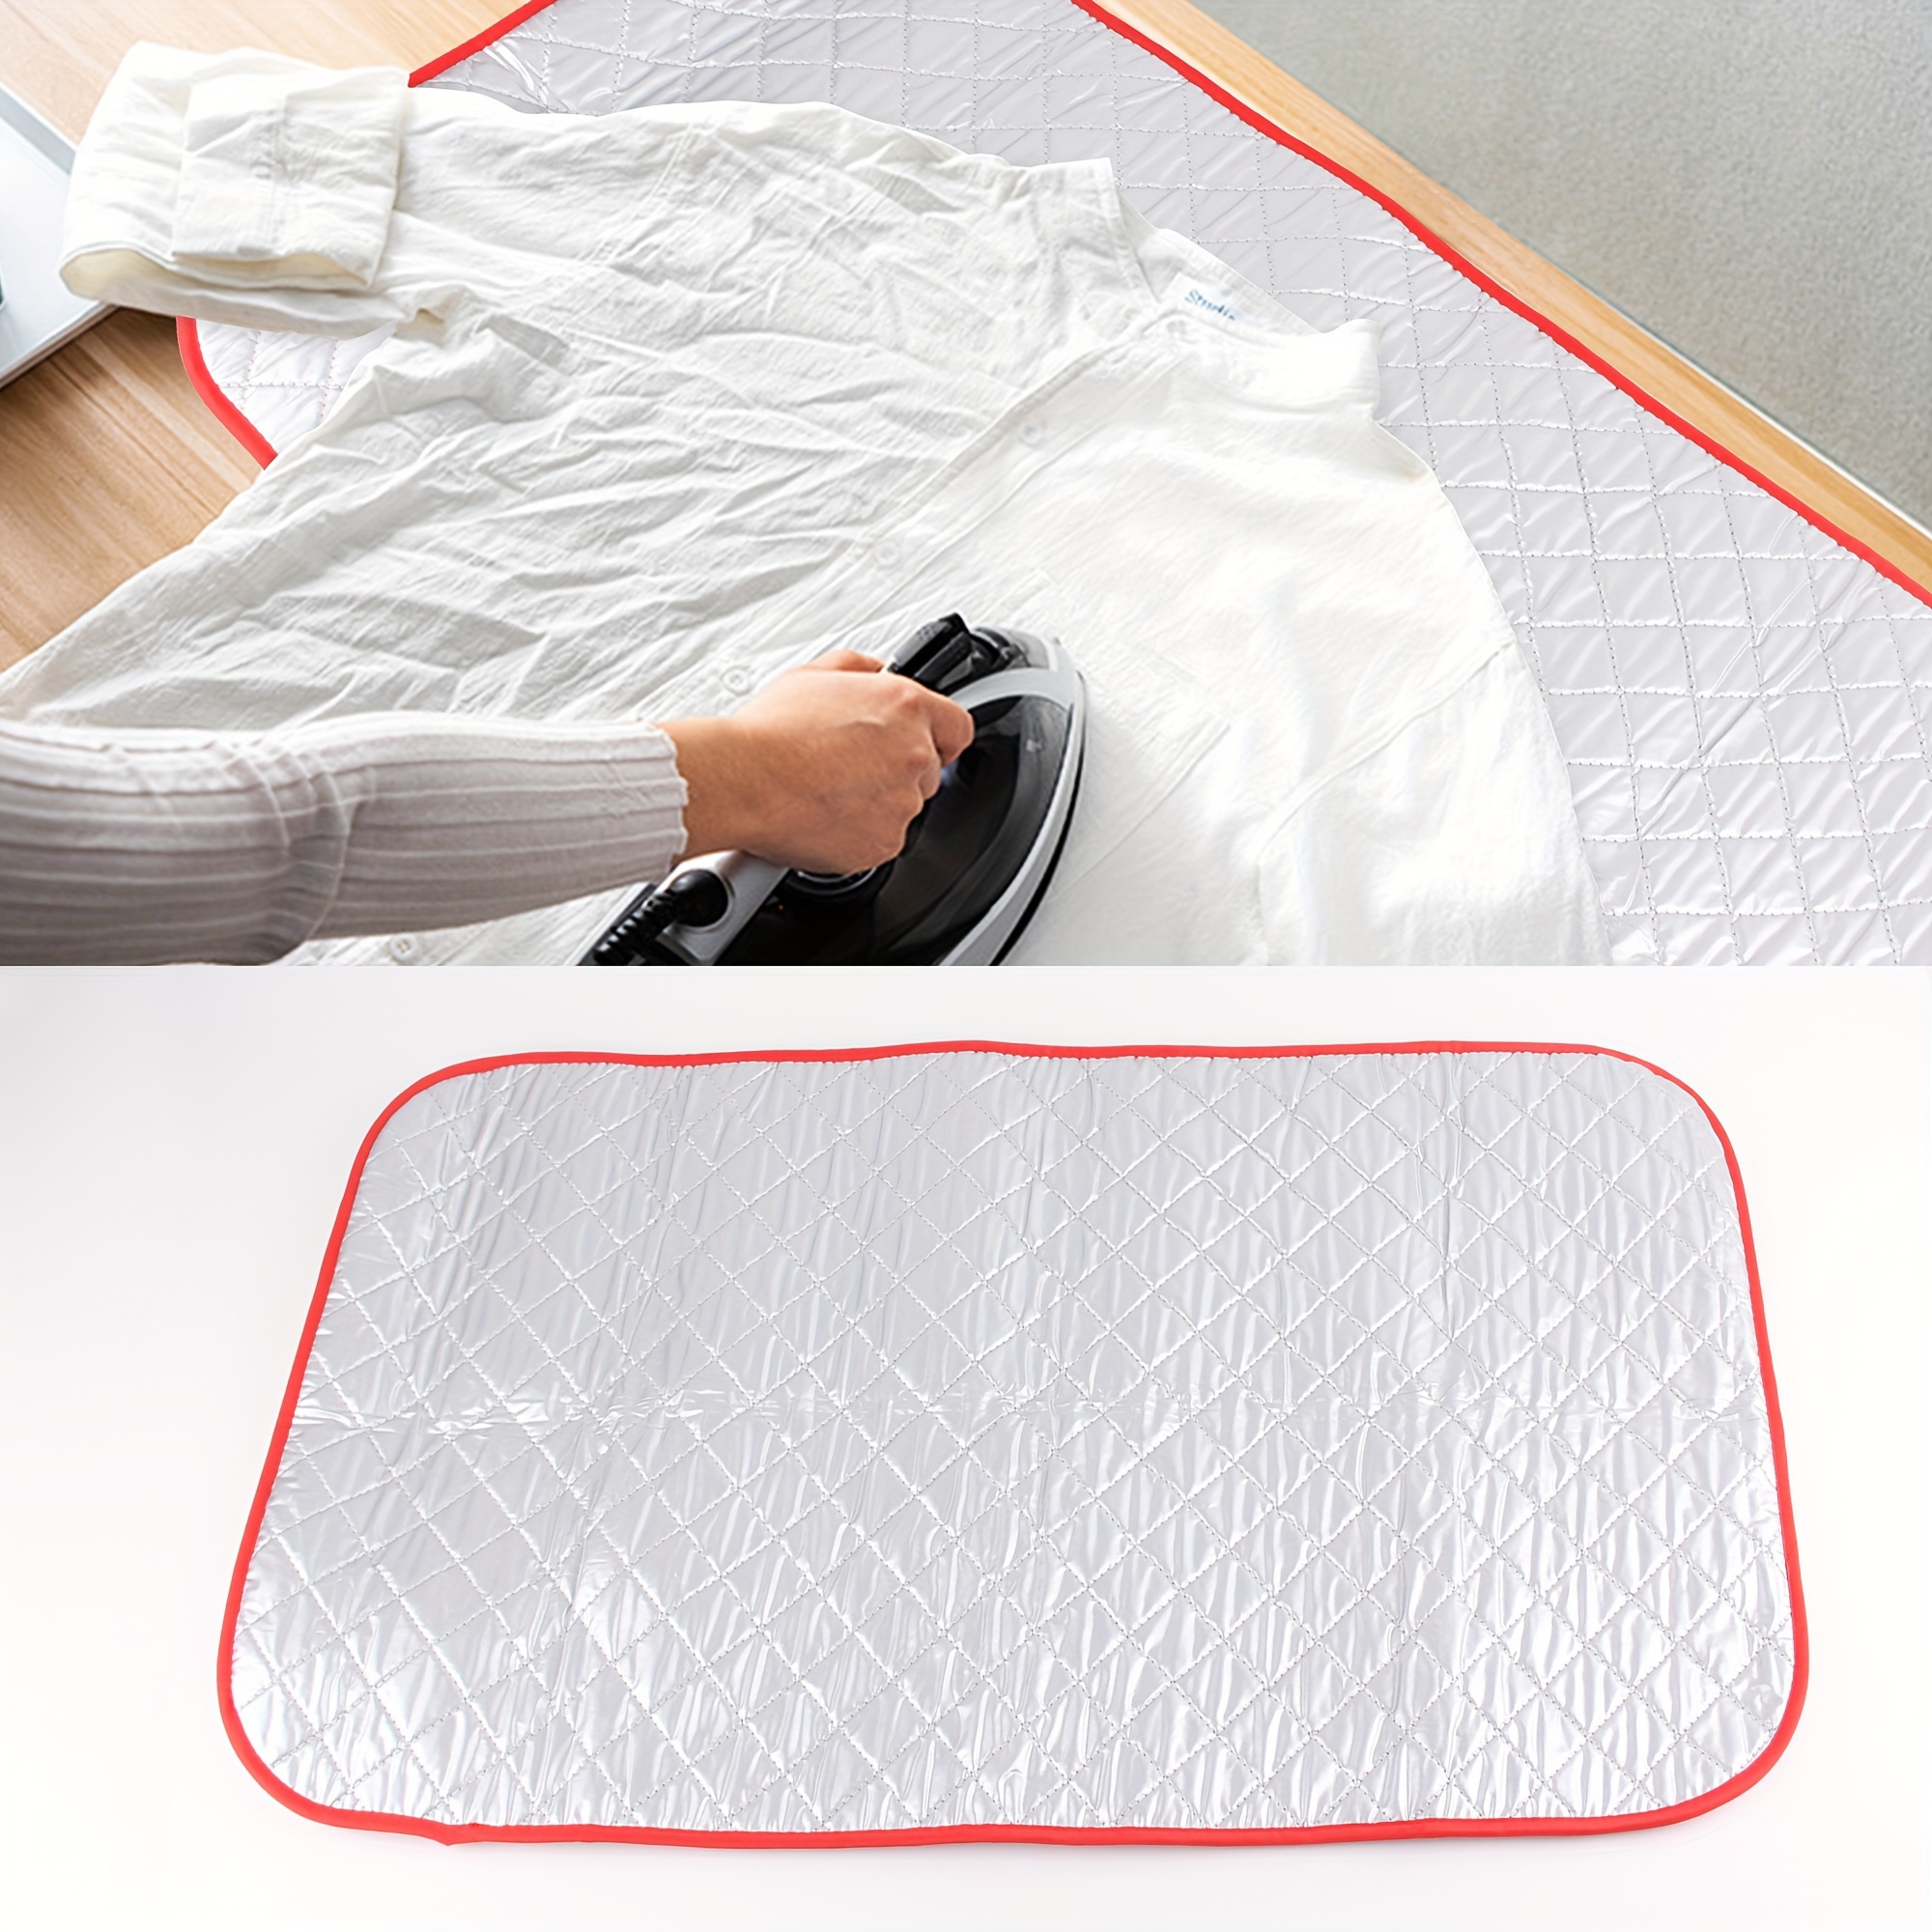 Household Essentials Portable Heat Resistant Ironing Mat